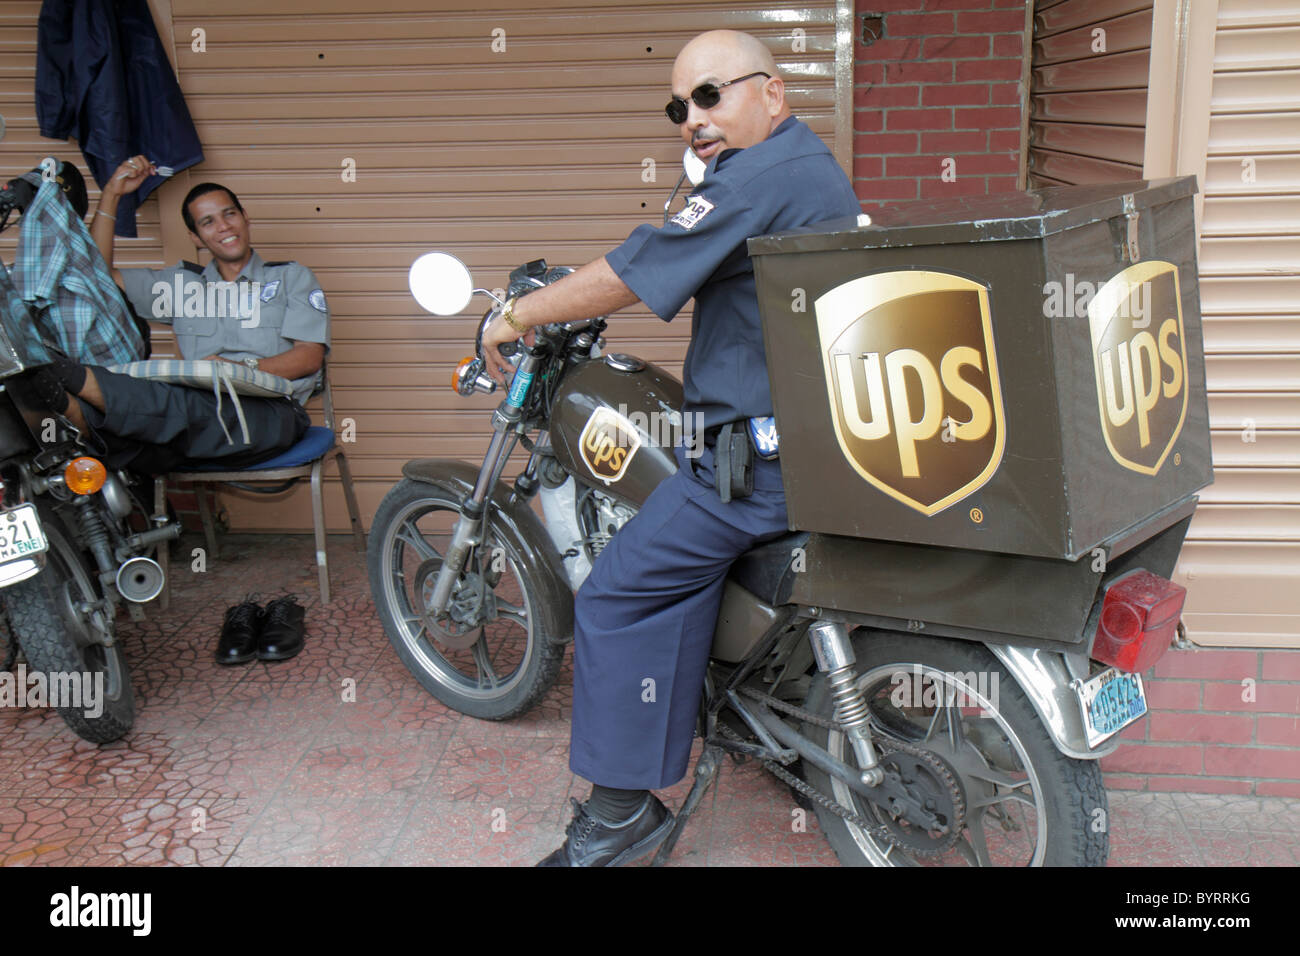 Panama,Latin,Central America,Panama City,Bella Vista,UPS,United Parcel Service,courier,package delivery,shipping,international company,commercial vehi Stock Photo